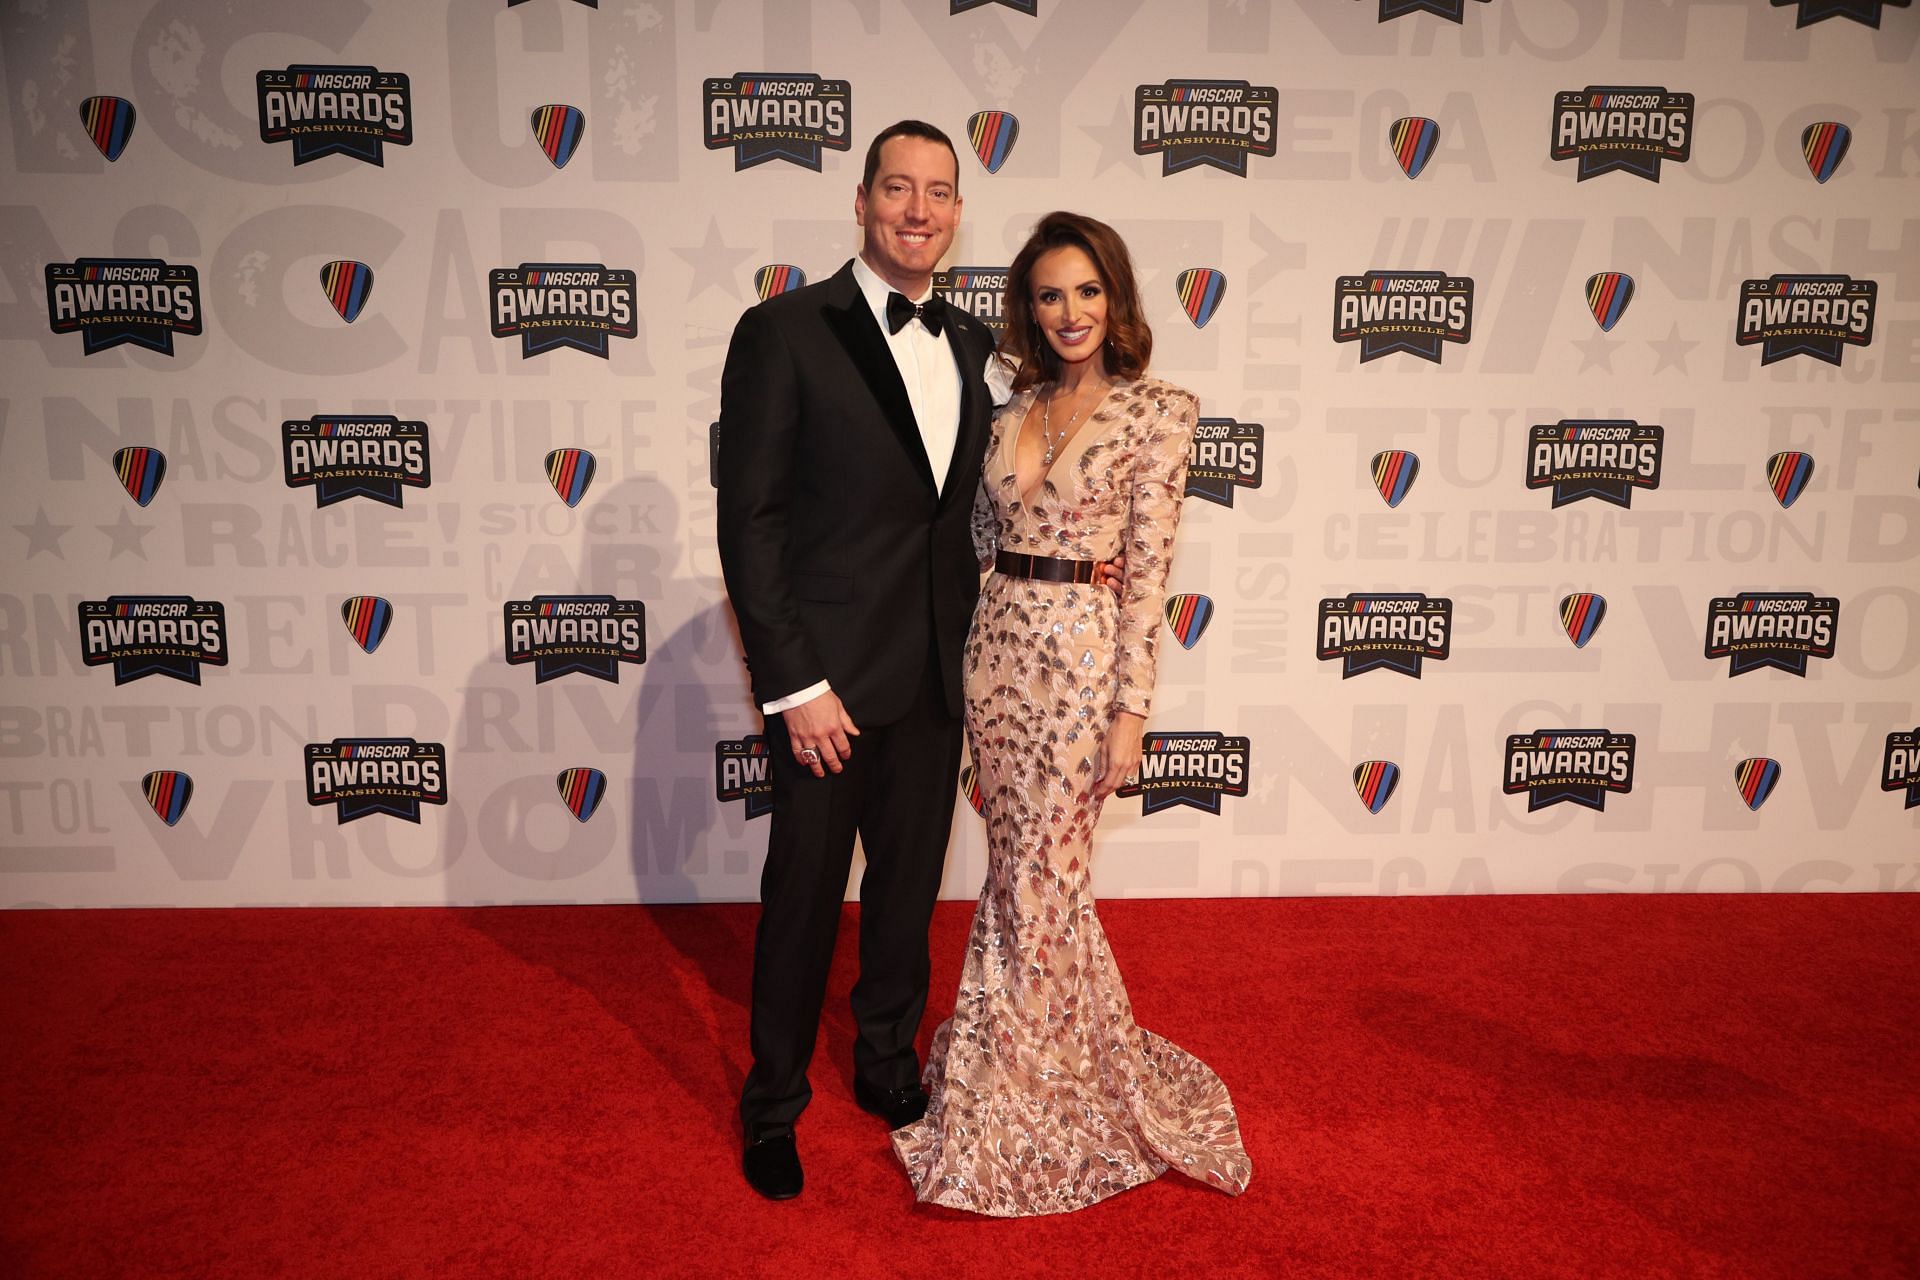 Kyle Busch and wife Samantha Busch pose on the red carpet prior to the NASCAR Champion&#039;s Banquet at the Music City Center (Photo by Chris Graythen/Getty Images)